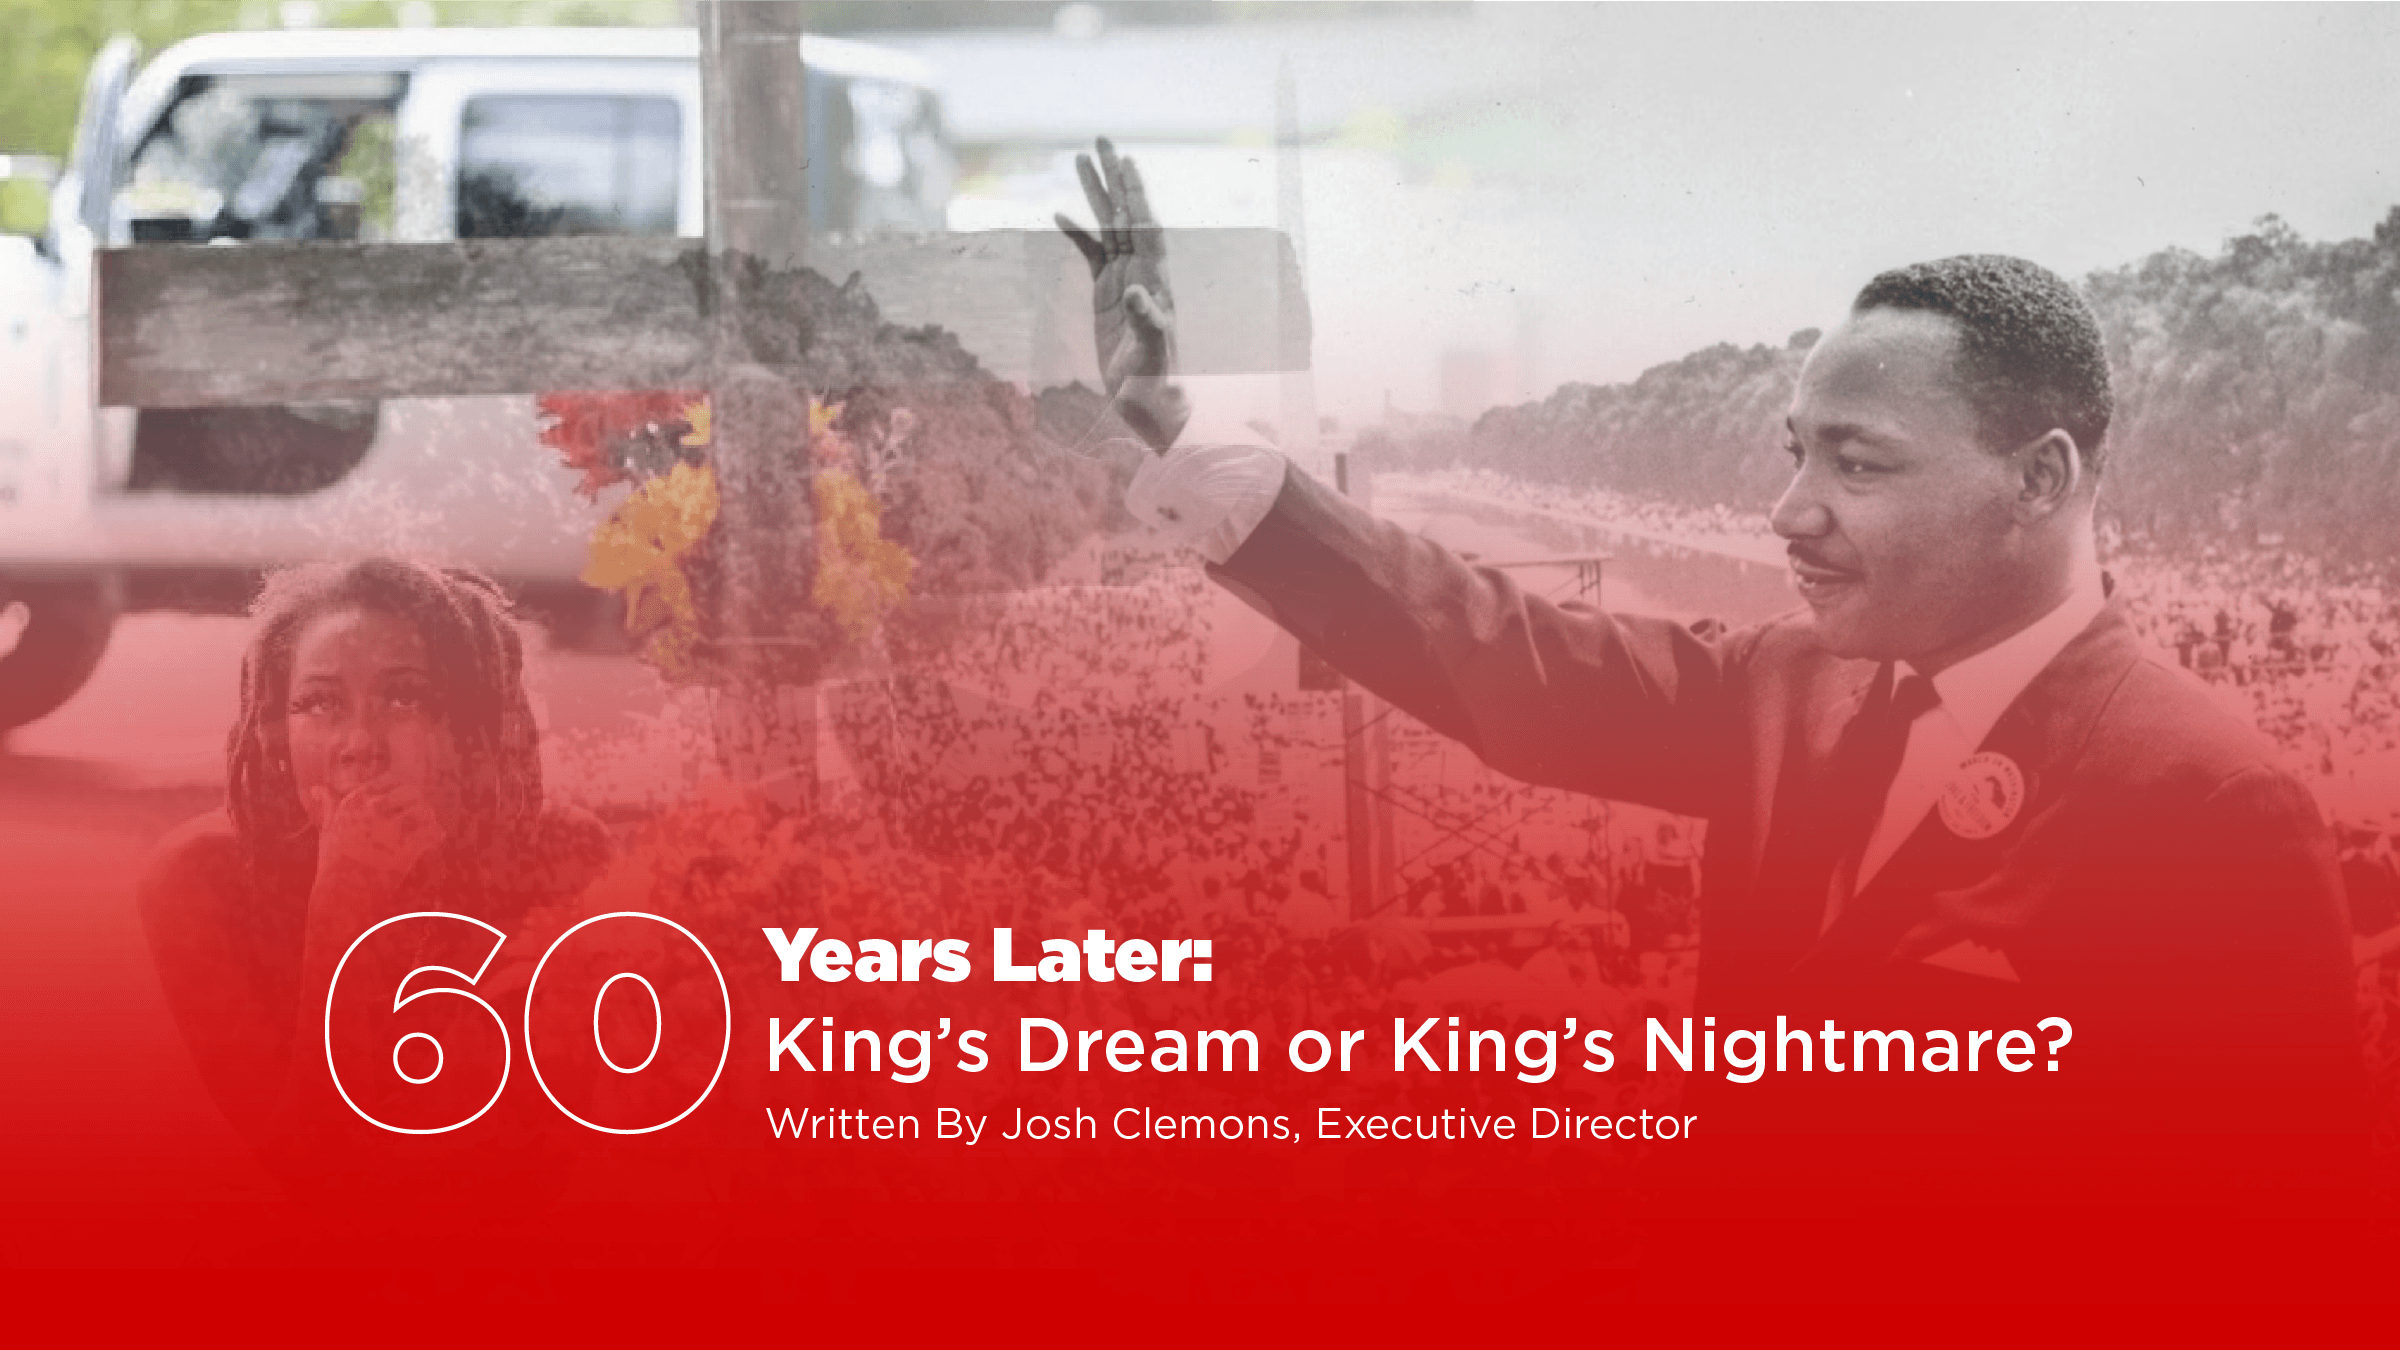 60 Years Later: King’s Dream or King’s Nightmare?